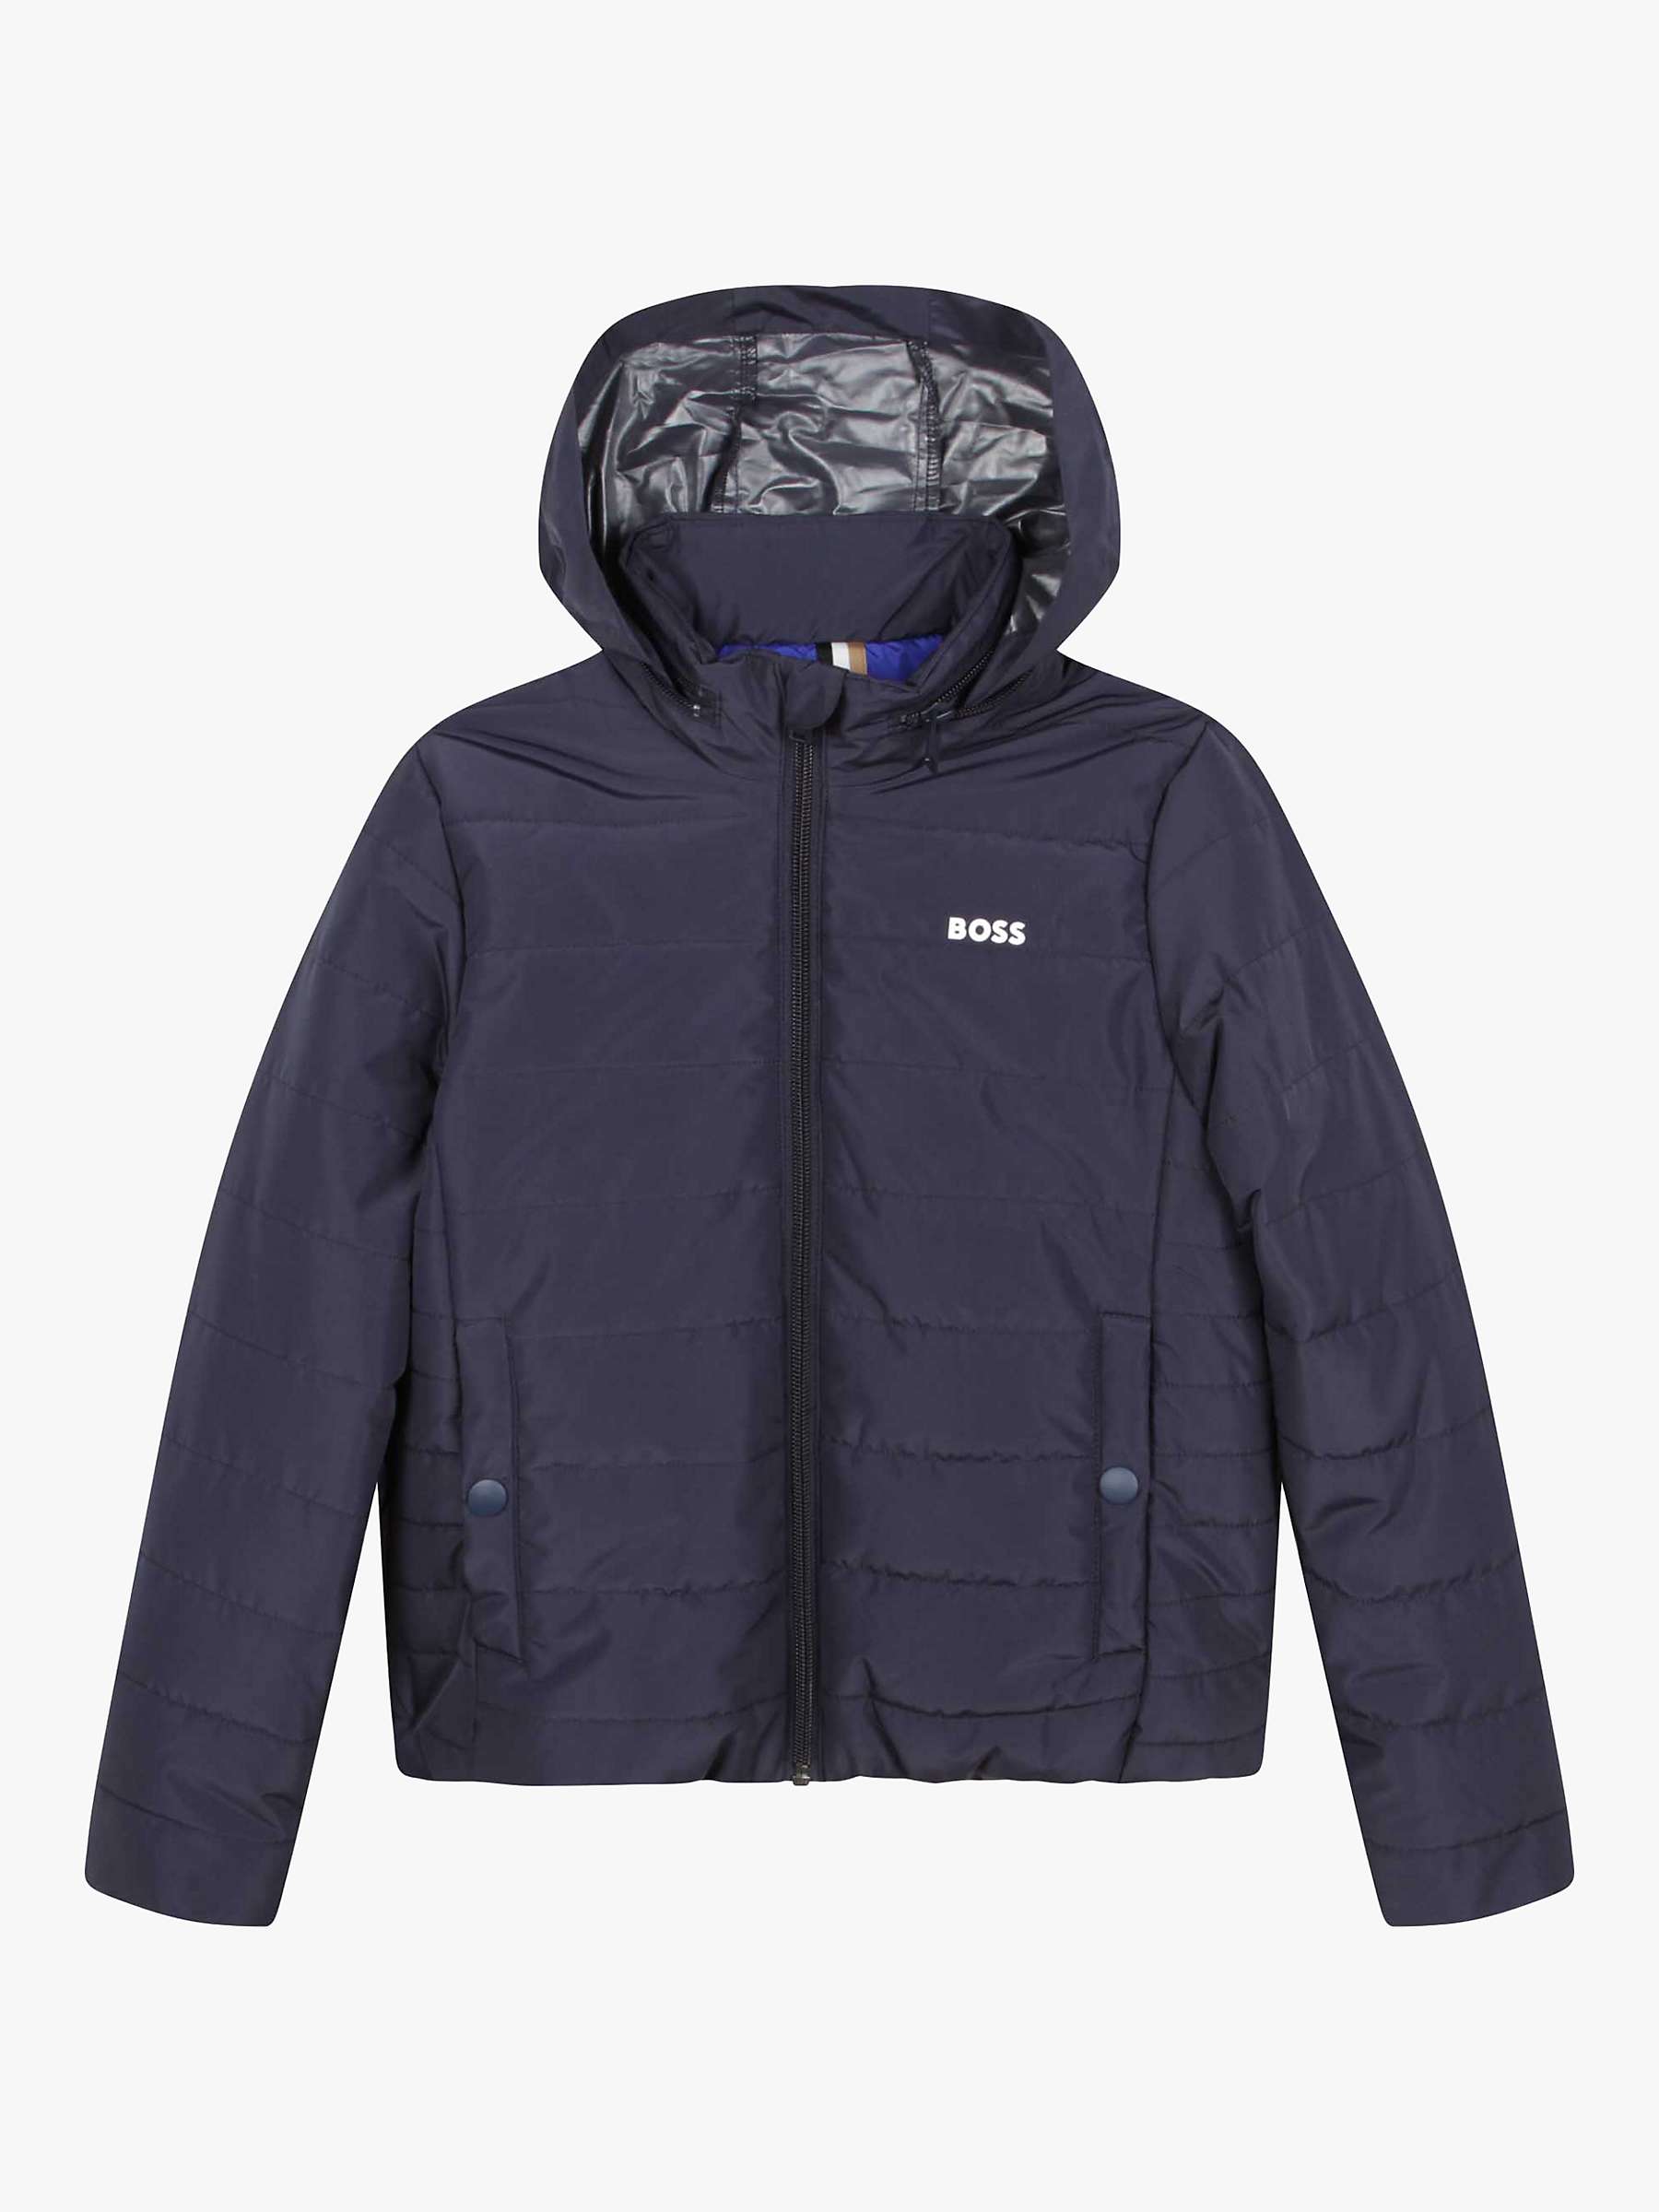 Buy BOSS Kids' Hooded Quilted Jacket, Navy Online at johnlewis.com